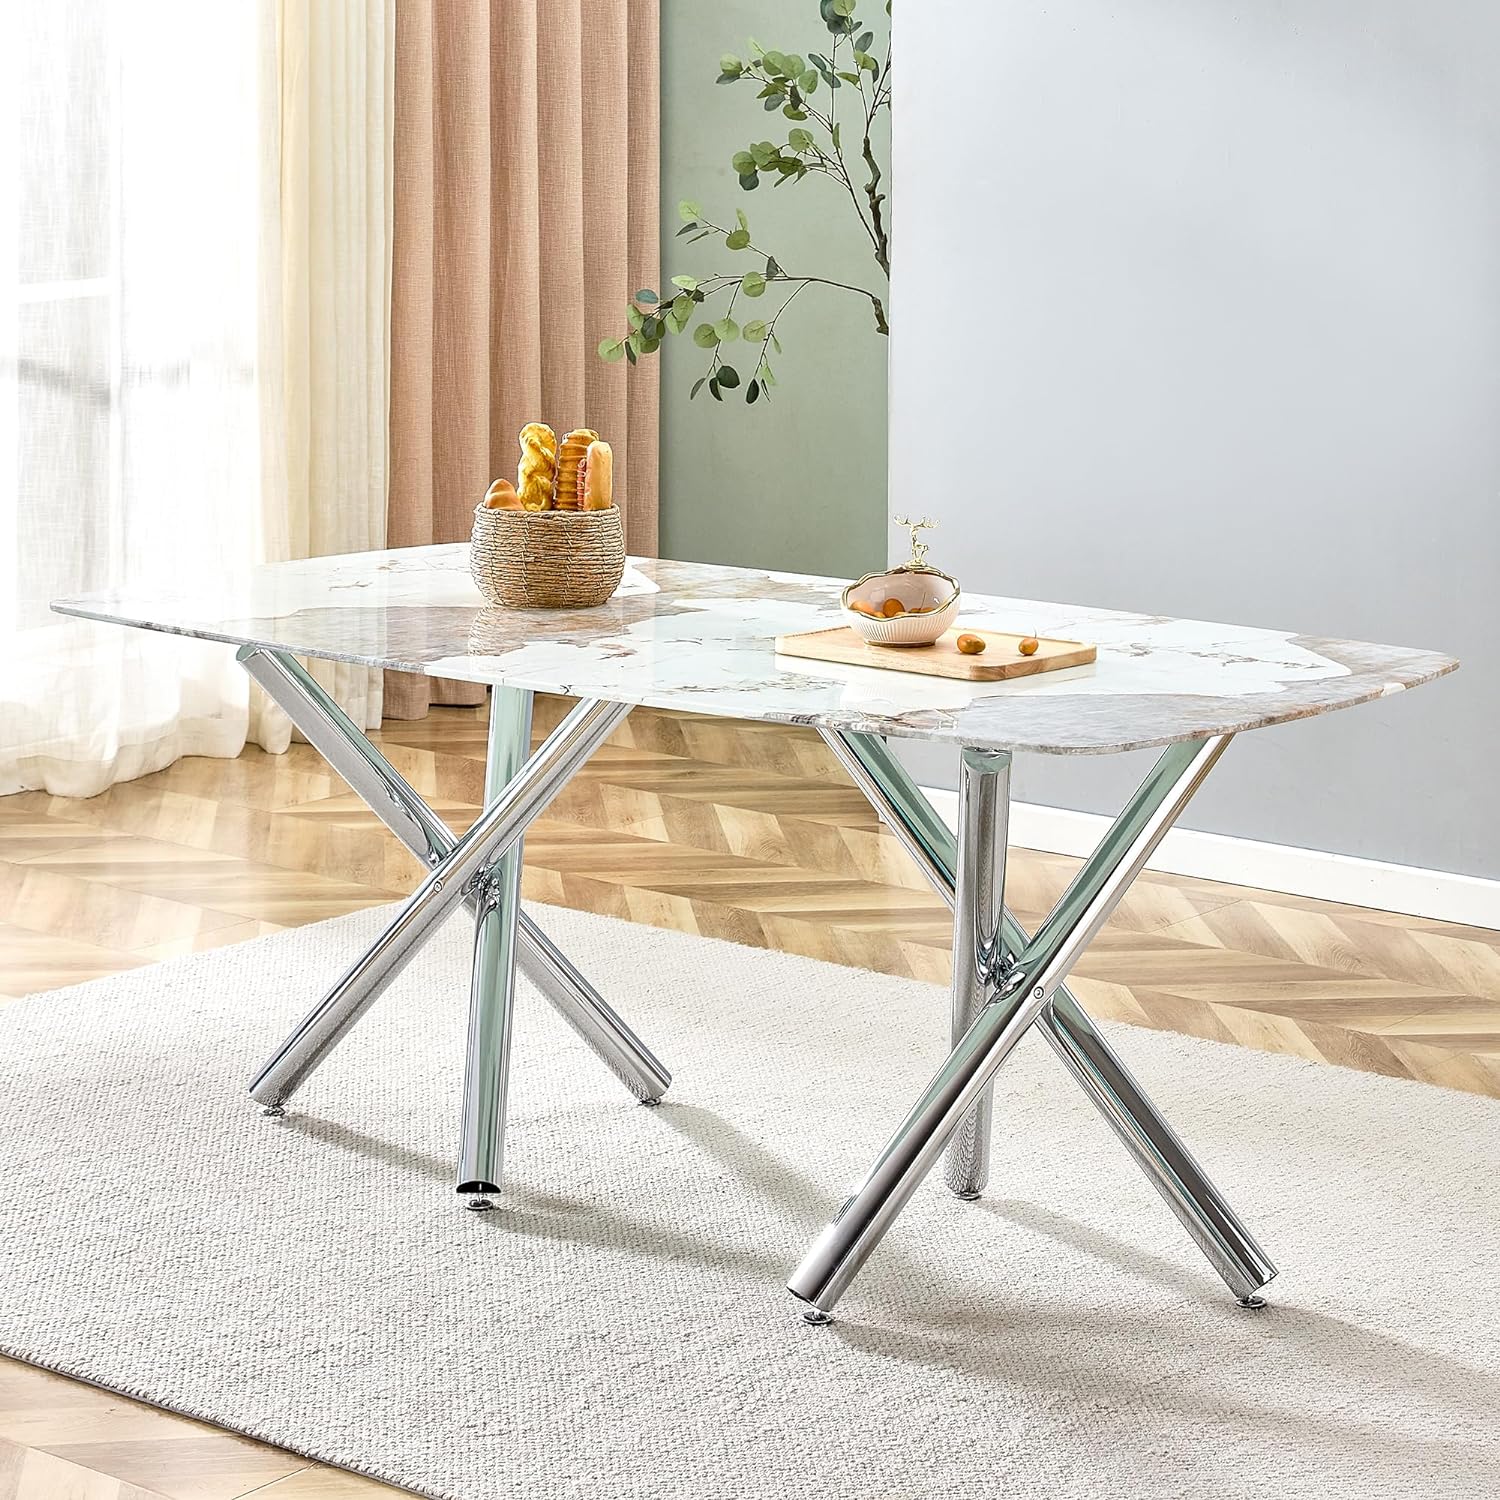 WILLIAMSPACE 70.9 Tempering Glass Dining Table with Silver Metal Legs, Modern Kitchen Dining Table for 6-8 Person, Rectangular DiningTable for Dining Room Living Room - White